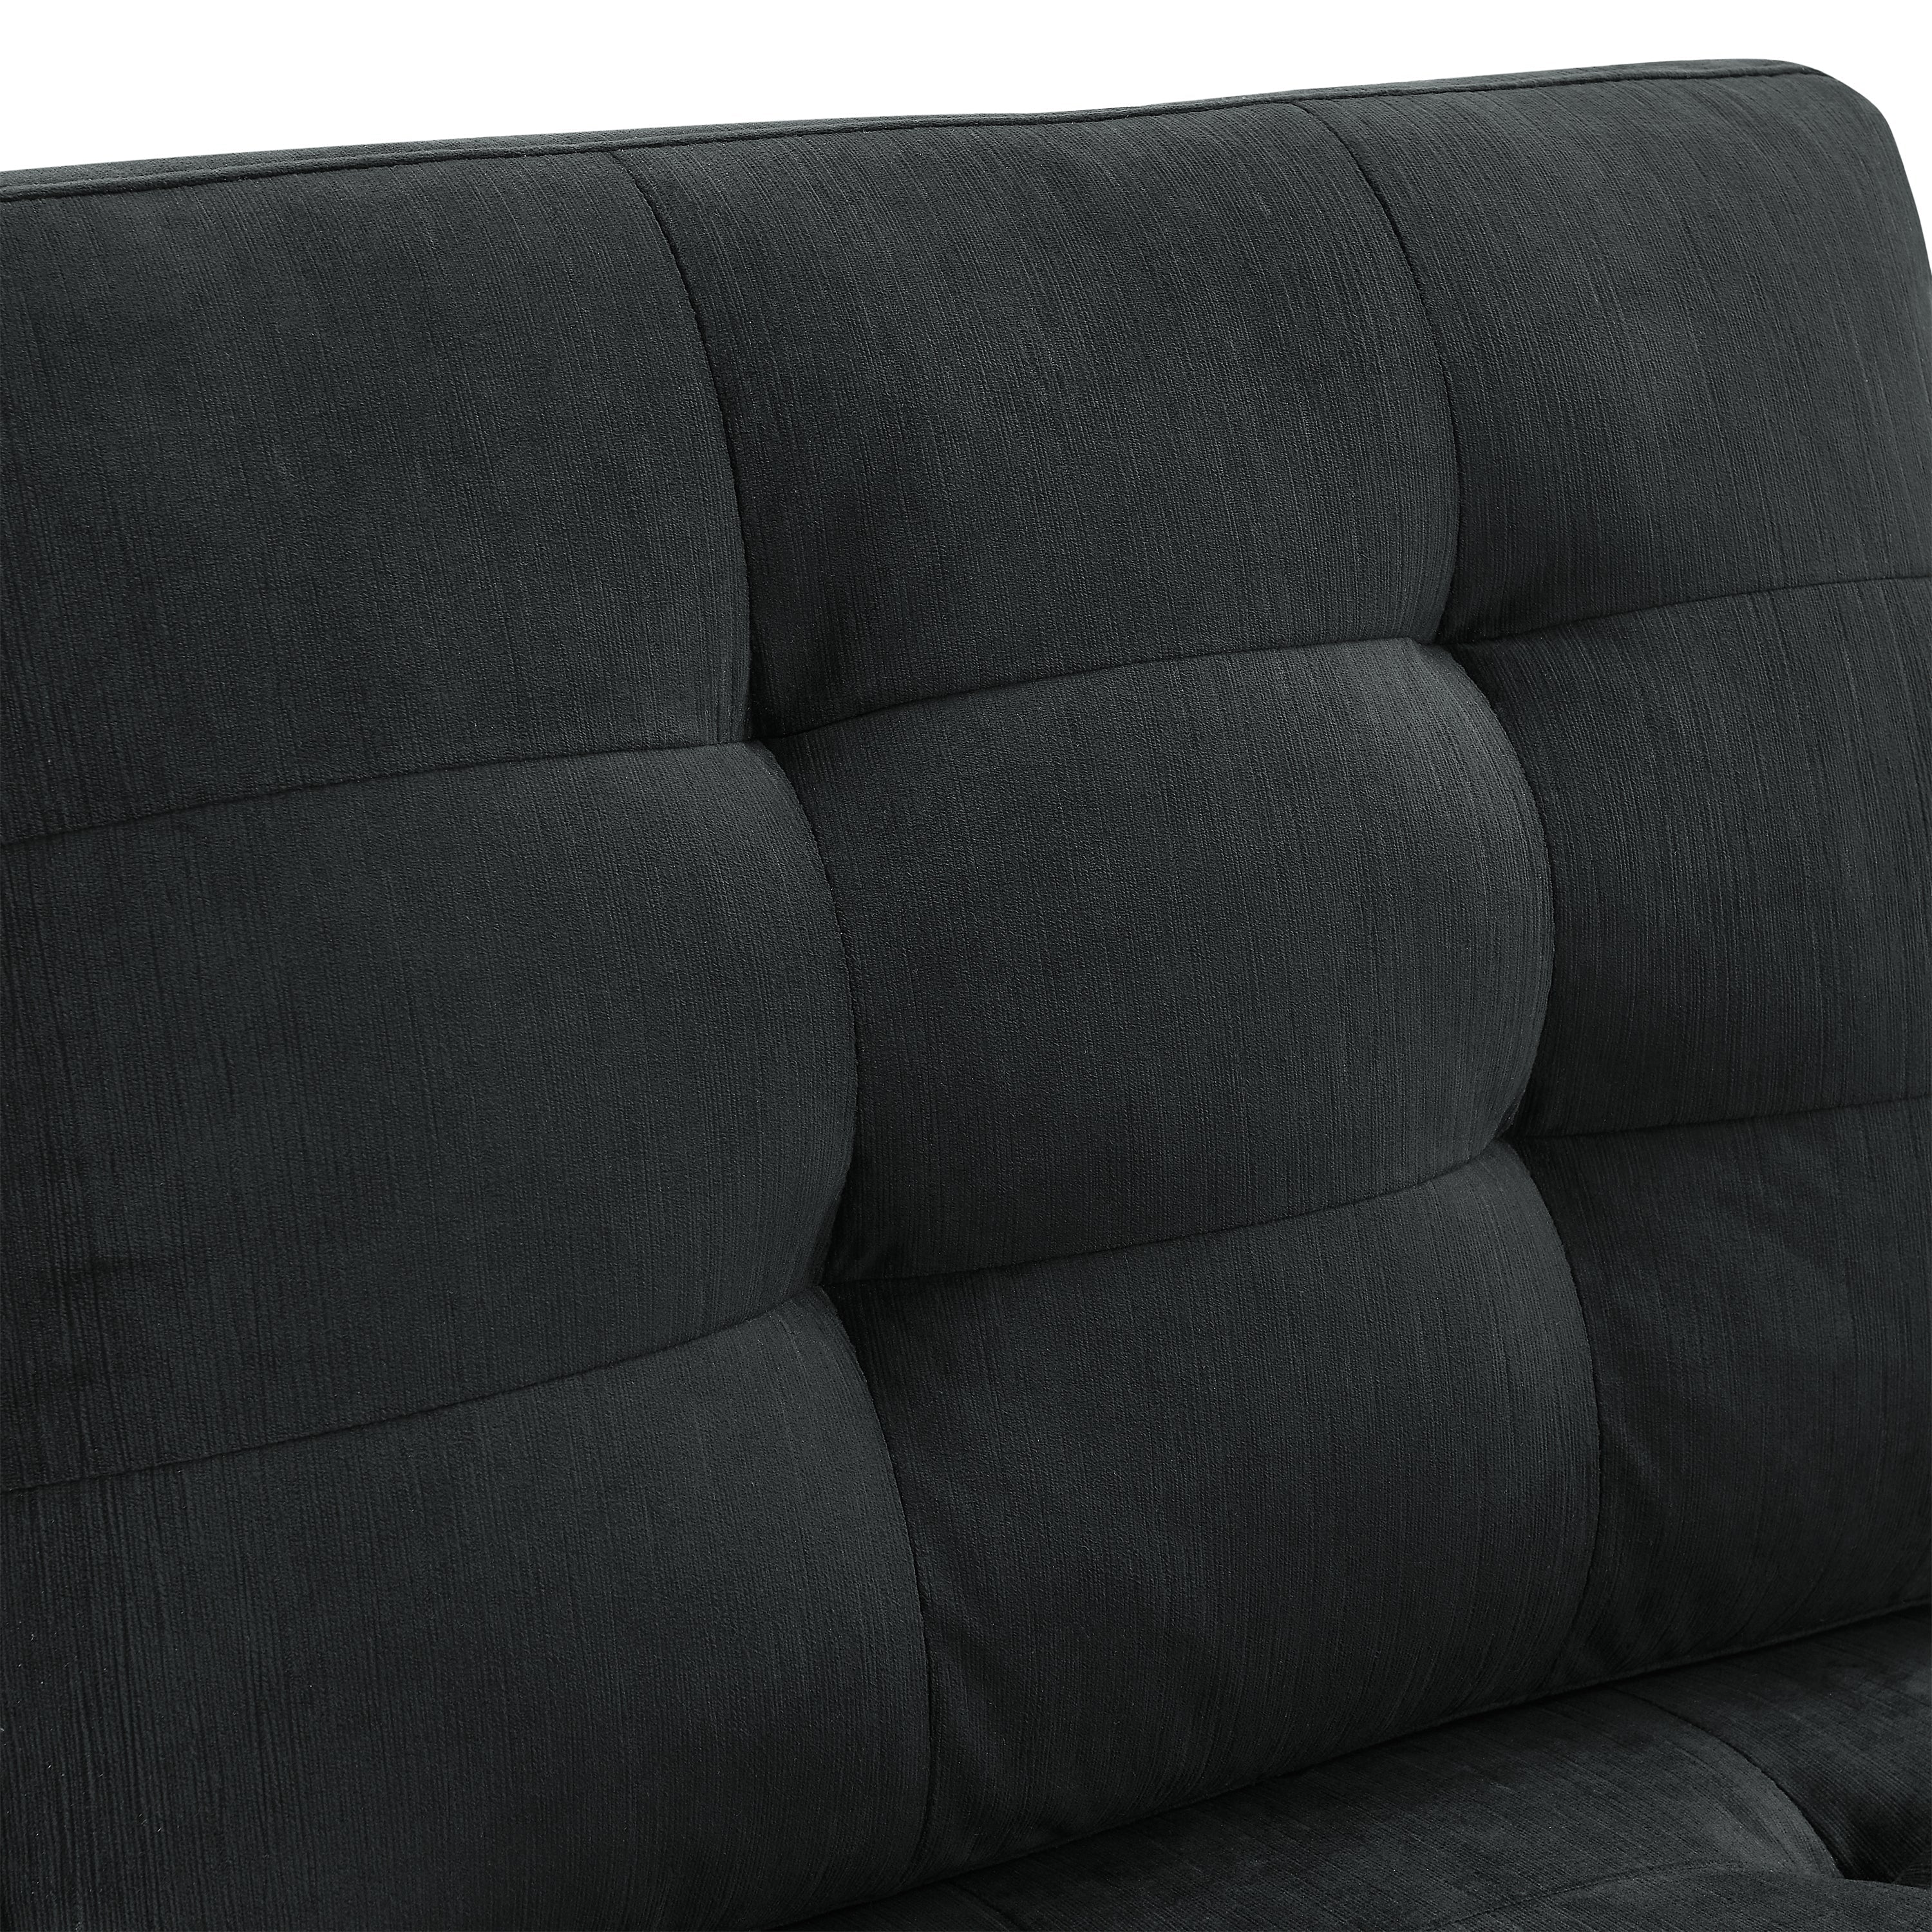 Black Velvet Modular Sectional Sofa – Customizable Comfort with Storage-Stationary Sectionals-American Furniture Outlet